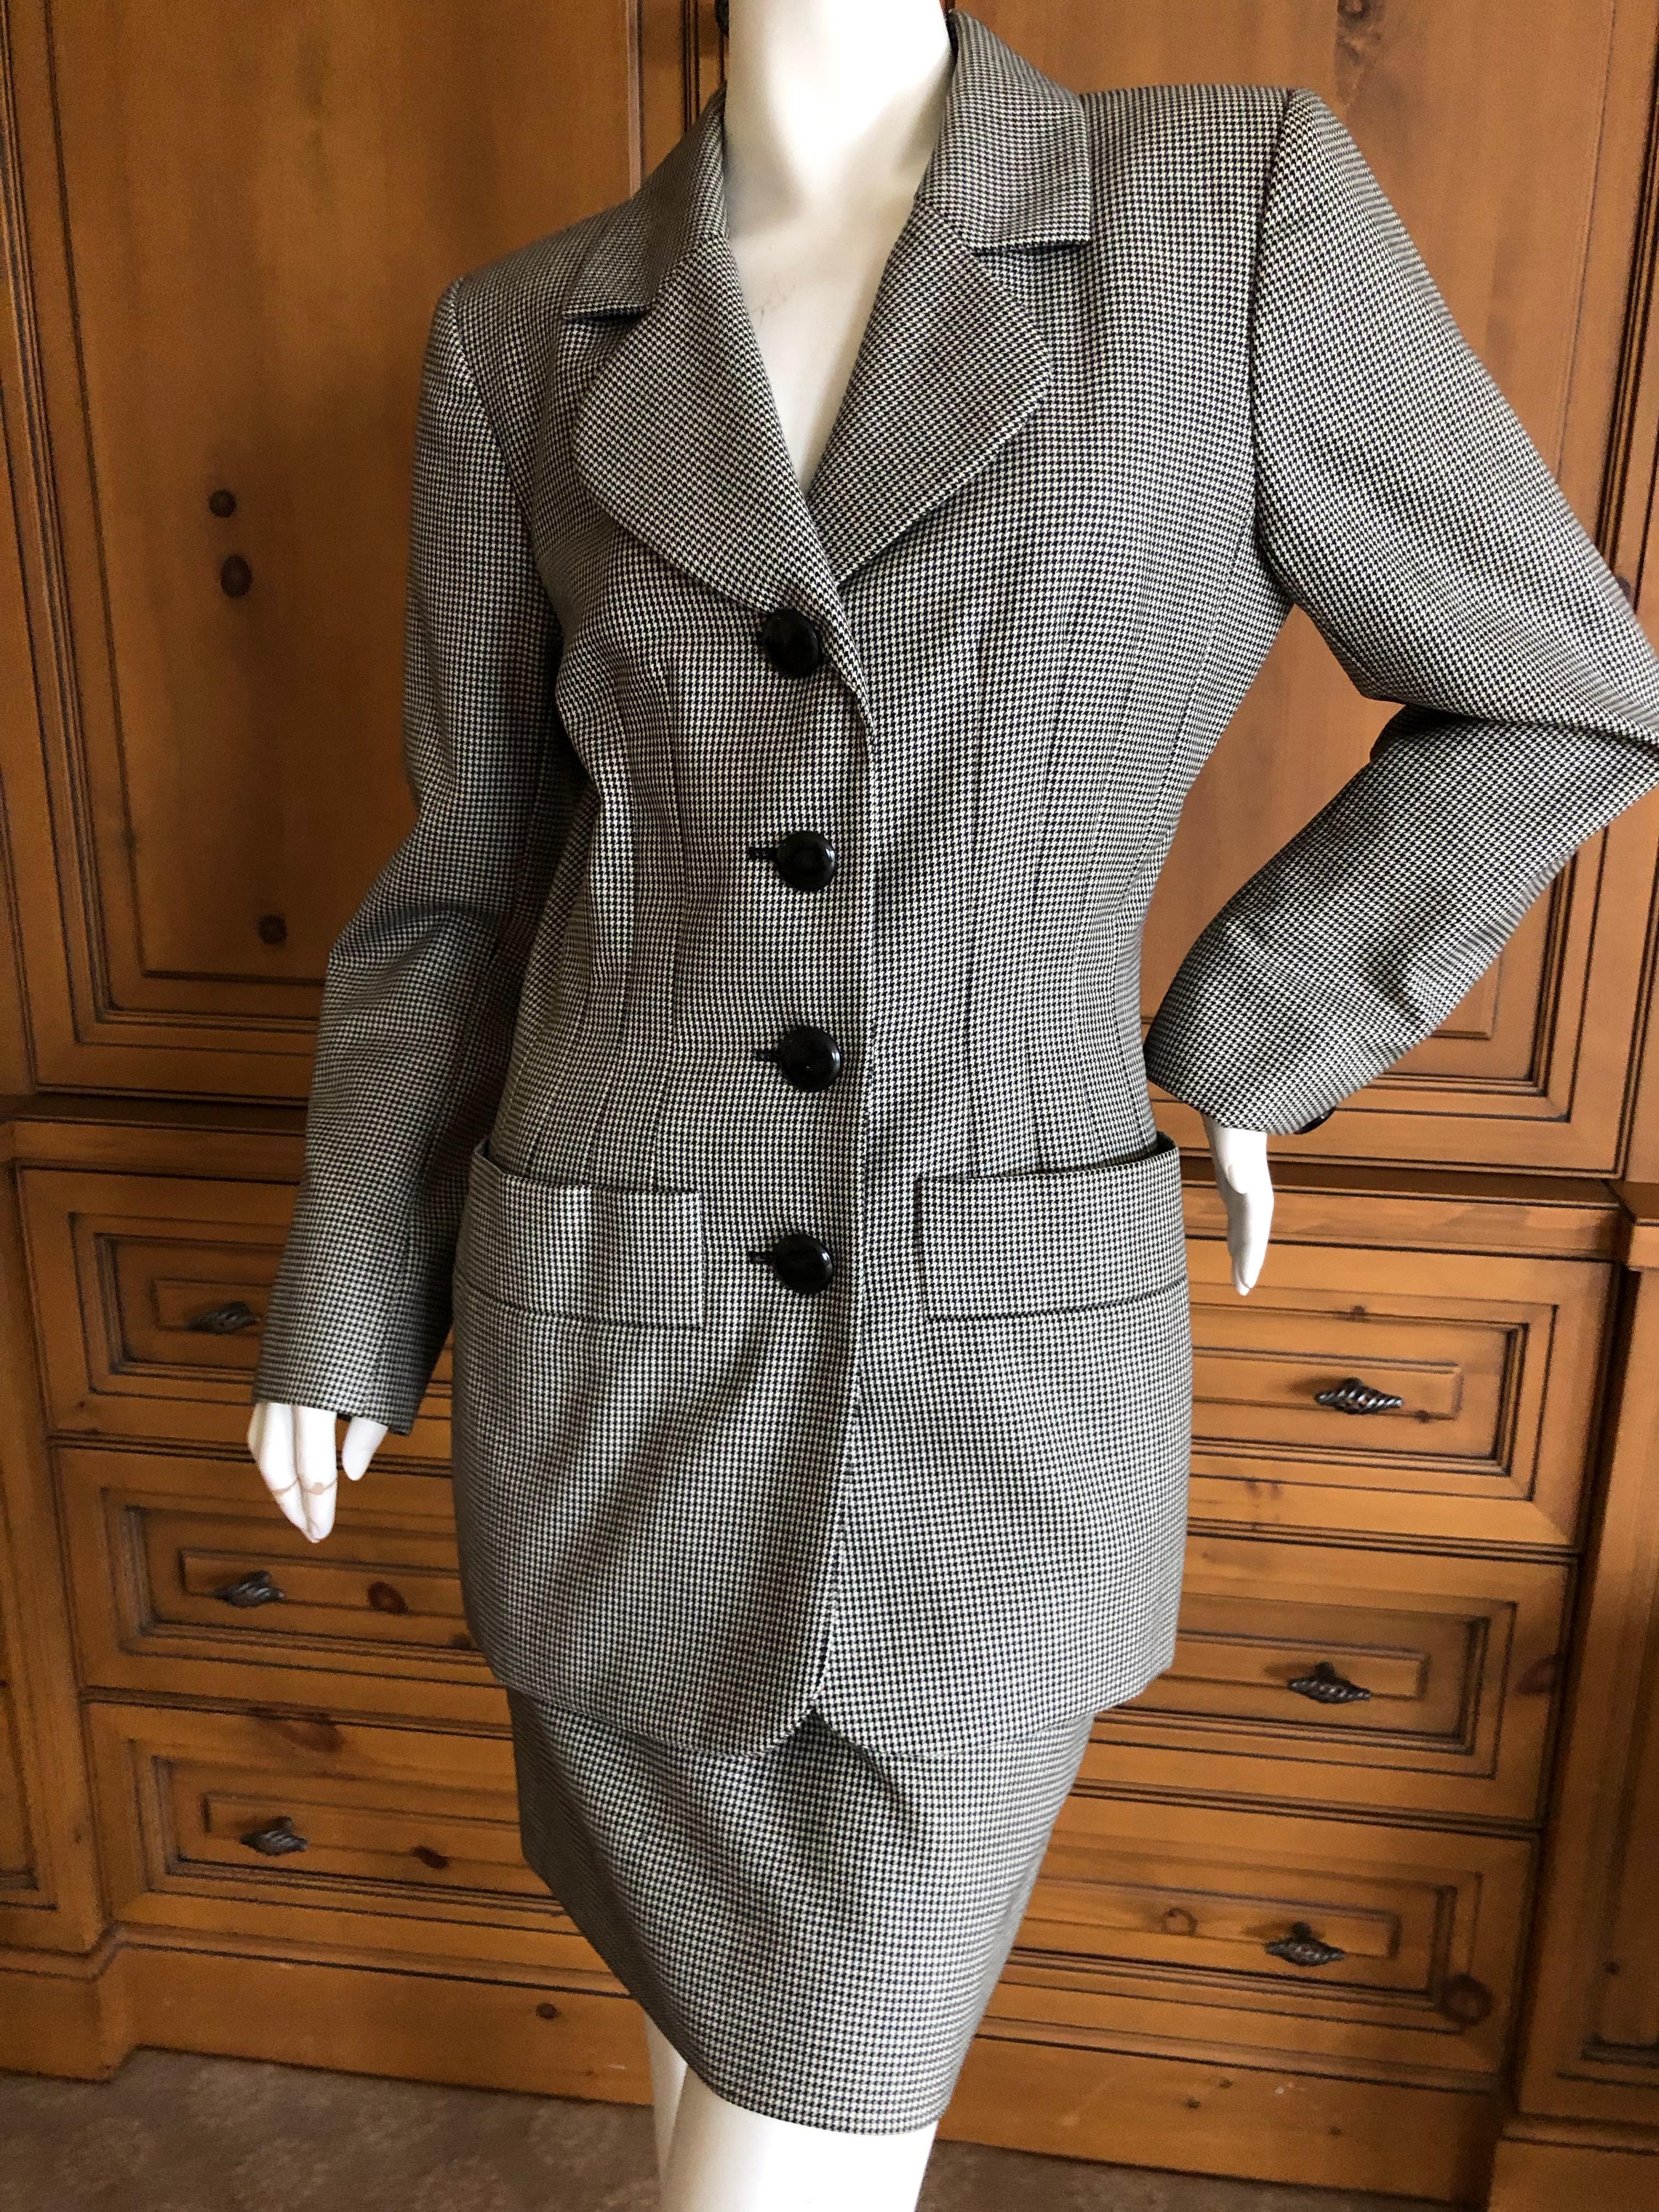 Yves Saint Laurent Rive Guache Vintage 1980's Houndstooth Suit In Excellent Condition For Sale In Cloverdale, CA